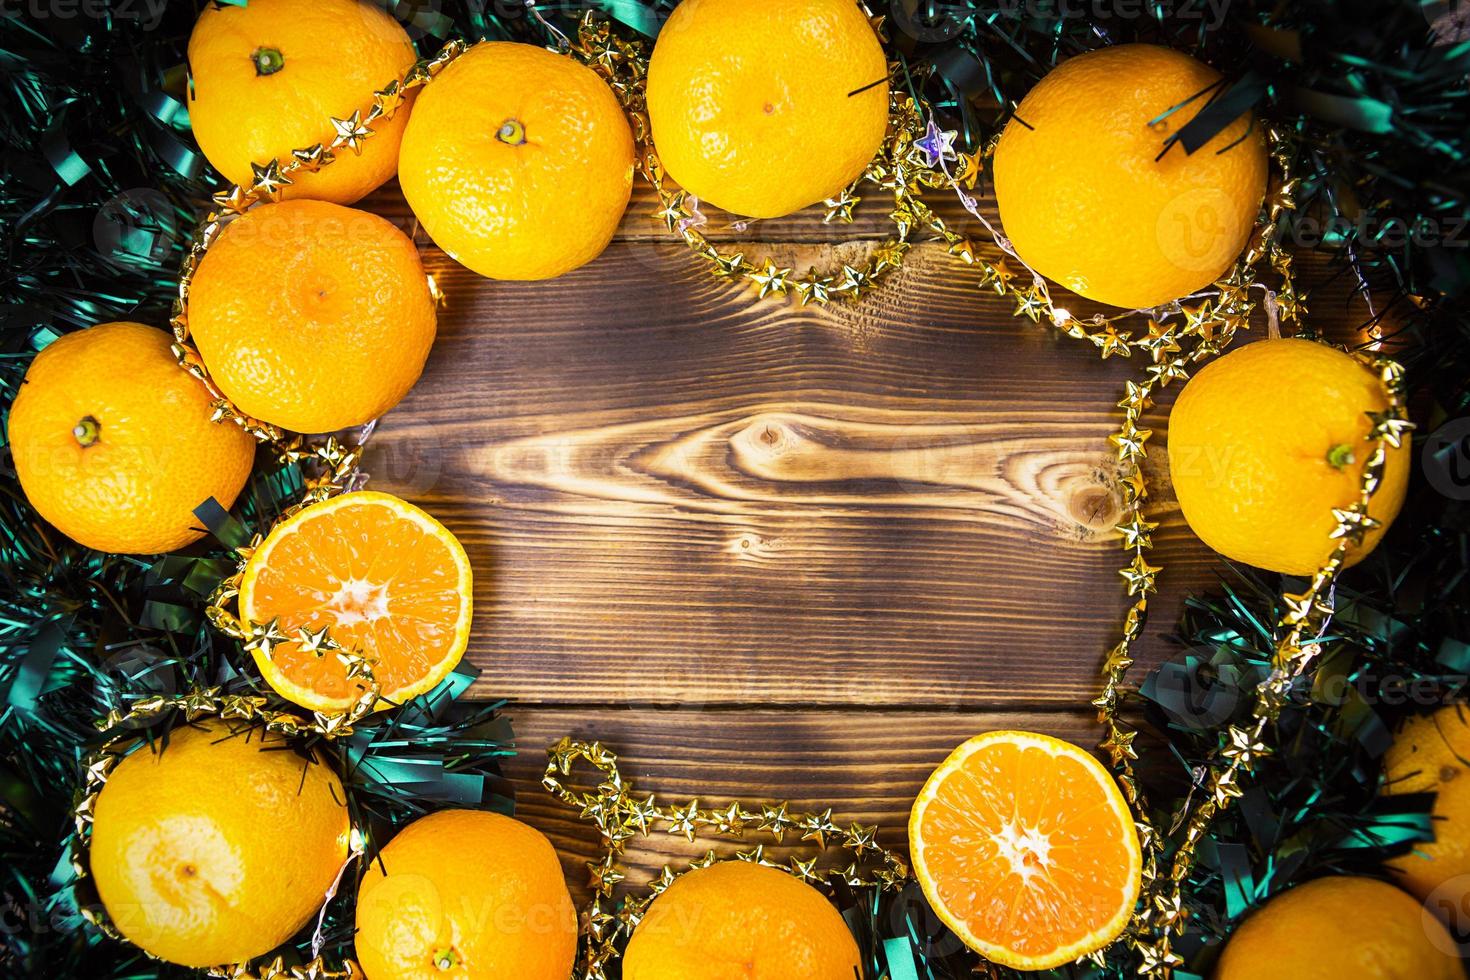 New year's holiday background made of wood with tangerines, garland lights and green tinsel. Half of an orange, citrus aroma of the holiday. Christmas, New year. Space for text. Frame photo